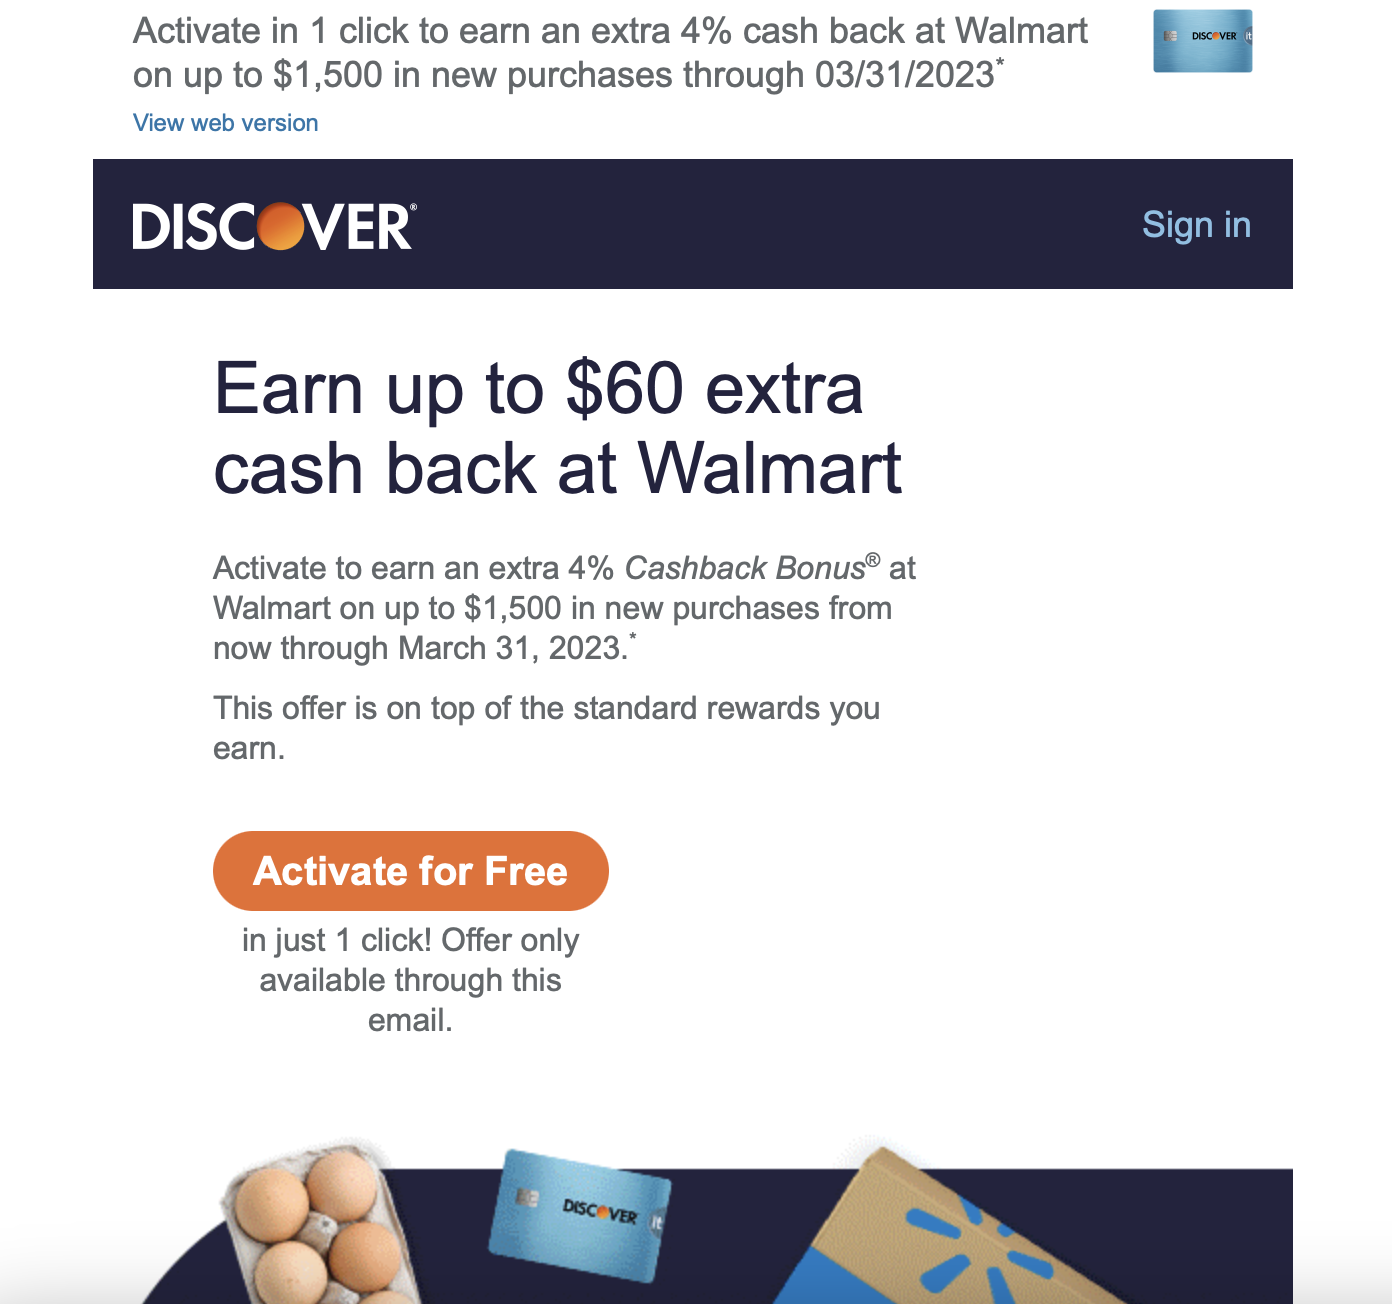 Discover credit card: Earn up to $60 extra cash back (4% up to $1500) at Walmart (YMMV)